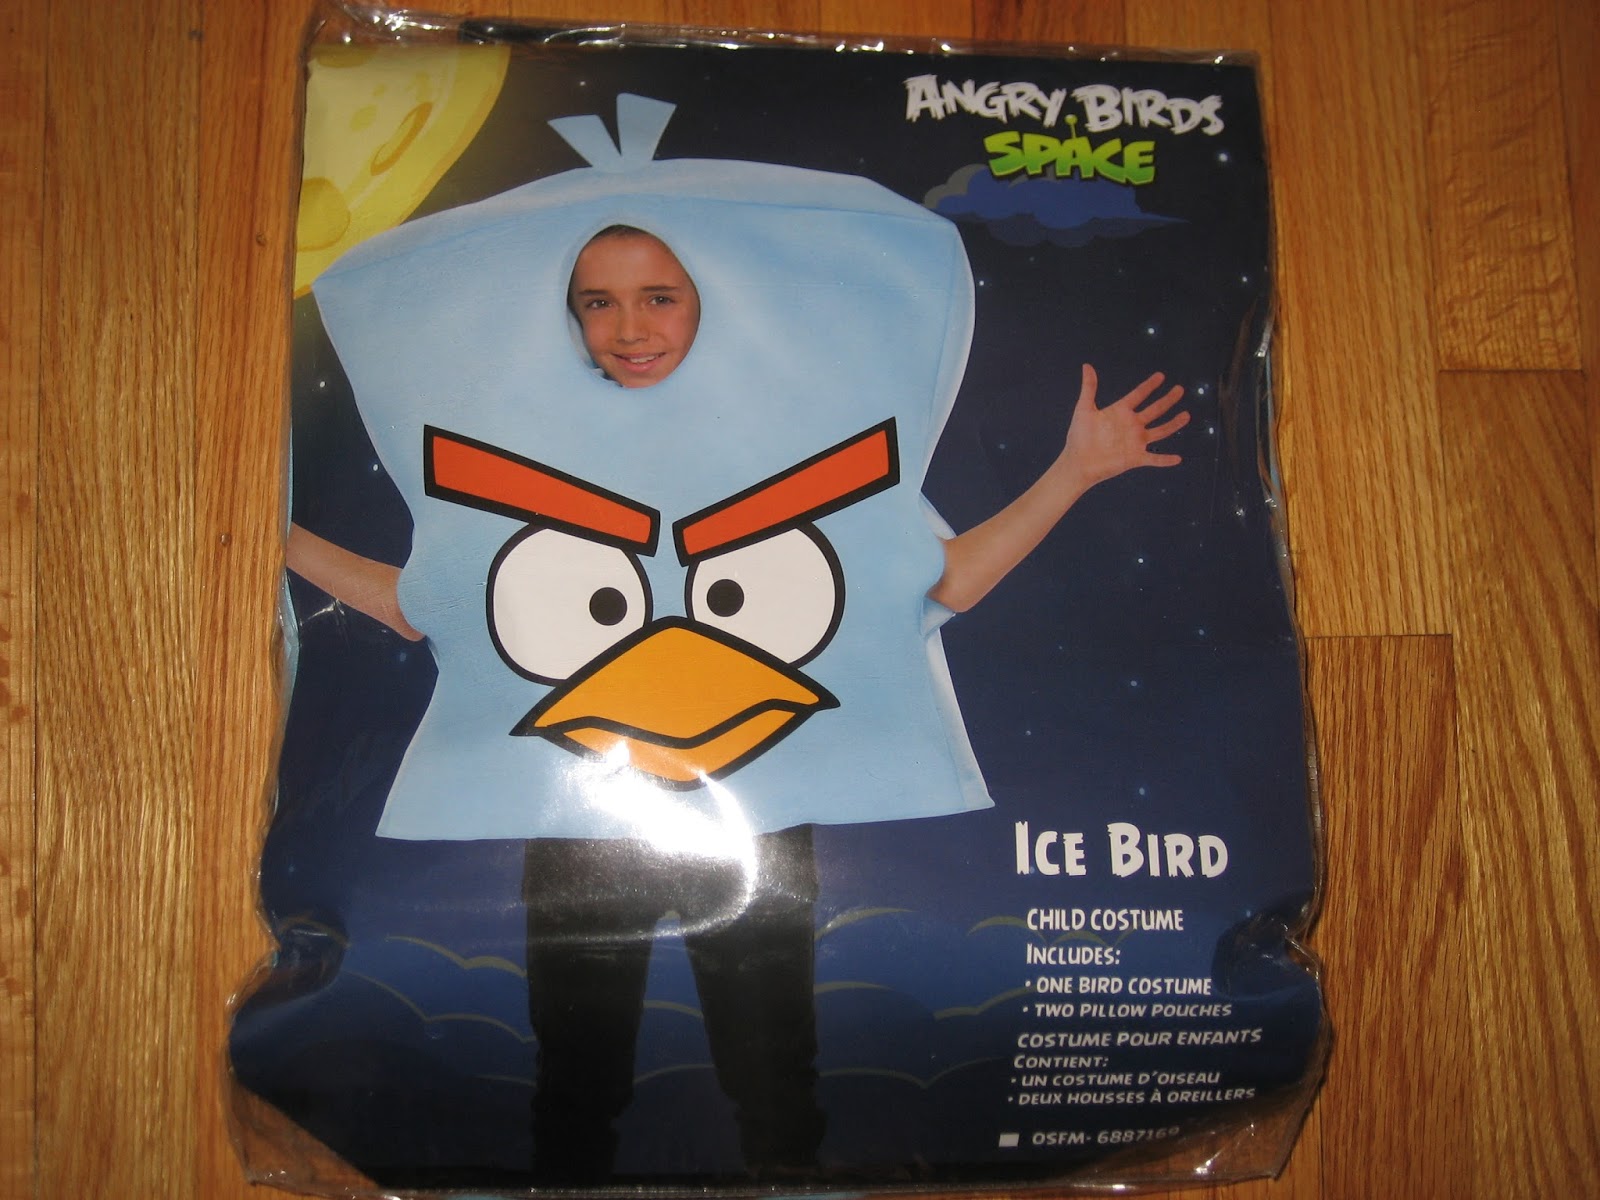 ITEMS FOR SALE!!!: ANGRY BIRDS SPACE ICE BIRD CHILD COSTUME-$15